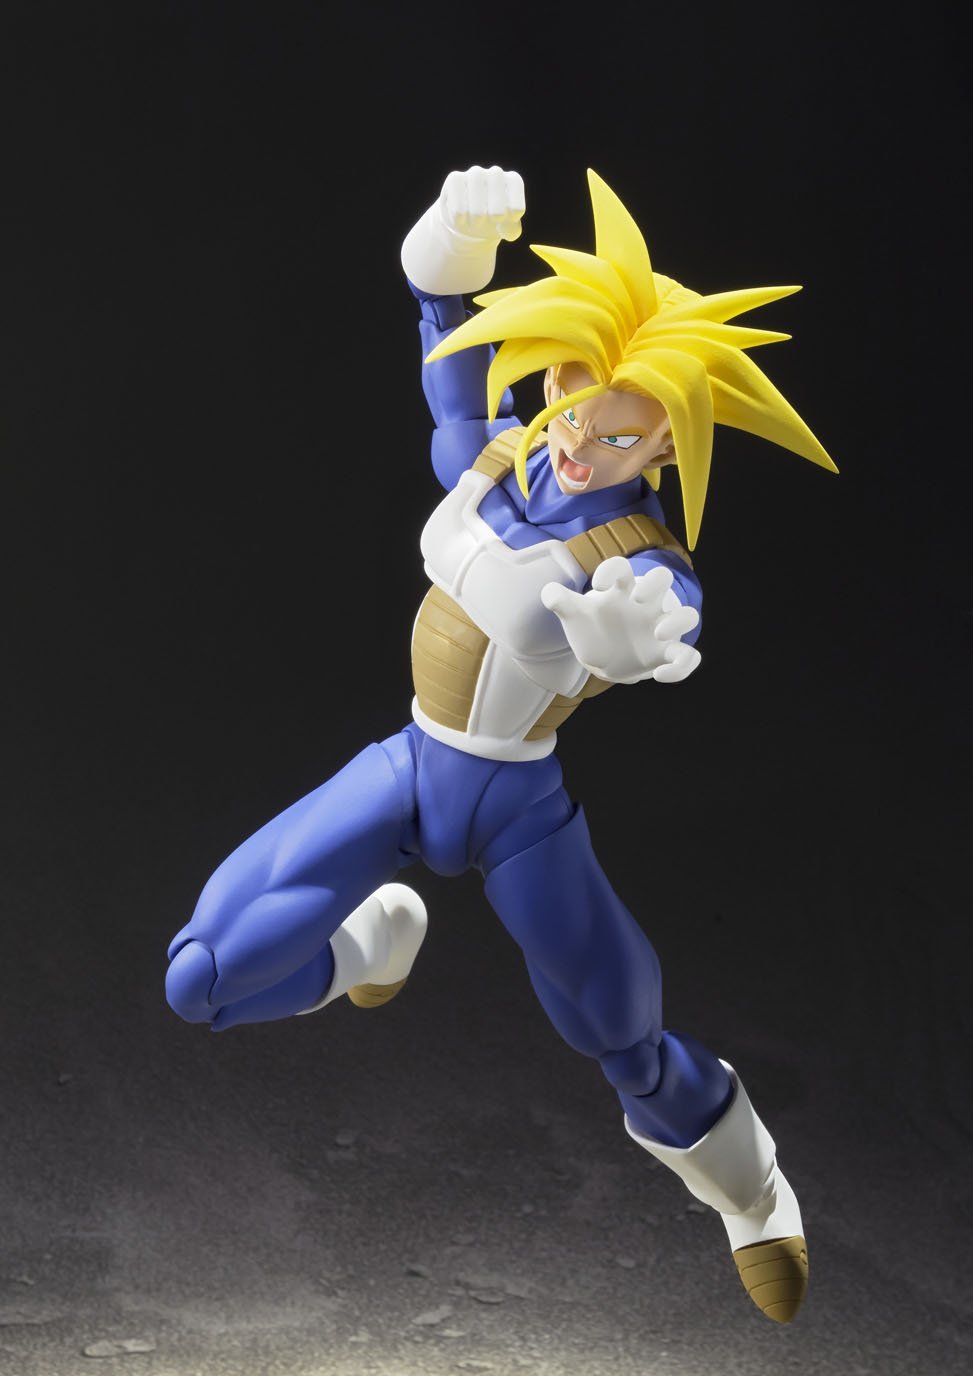 Bandai S.H.Figuarts Super Saiyan Trunks -The boy from the future